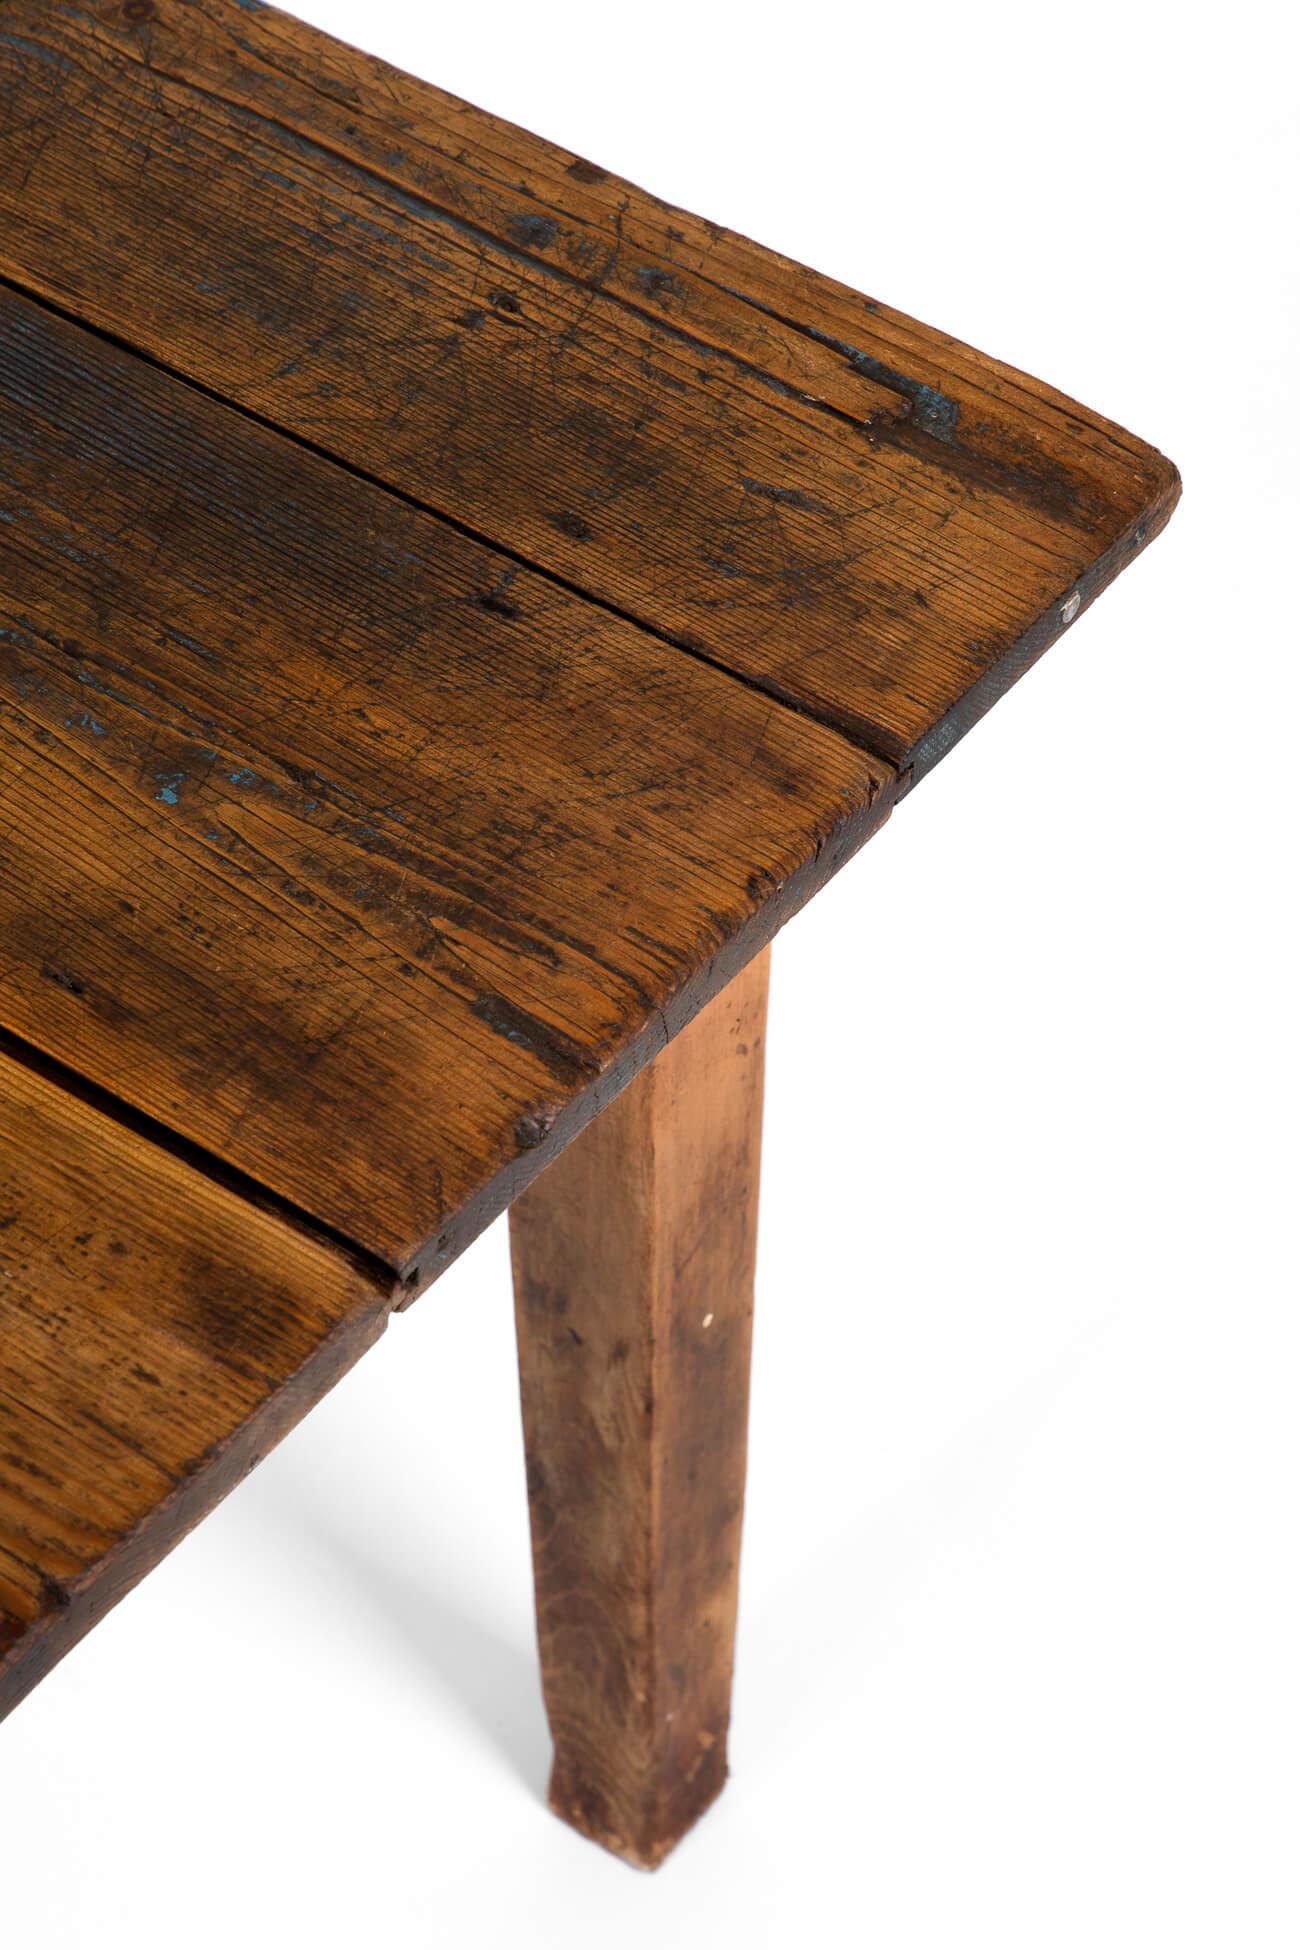 Pine English Country House Table